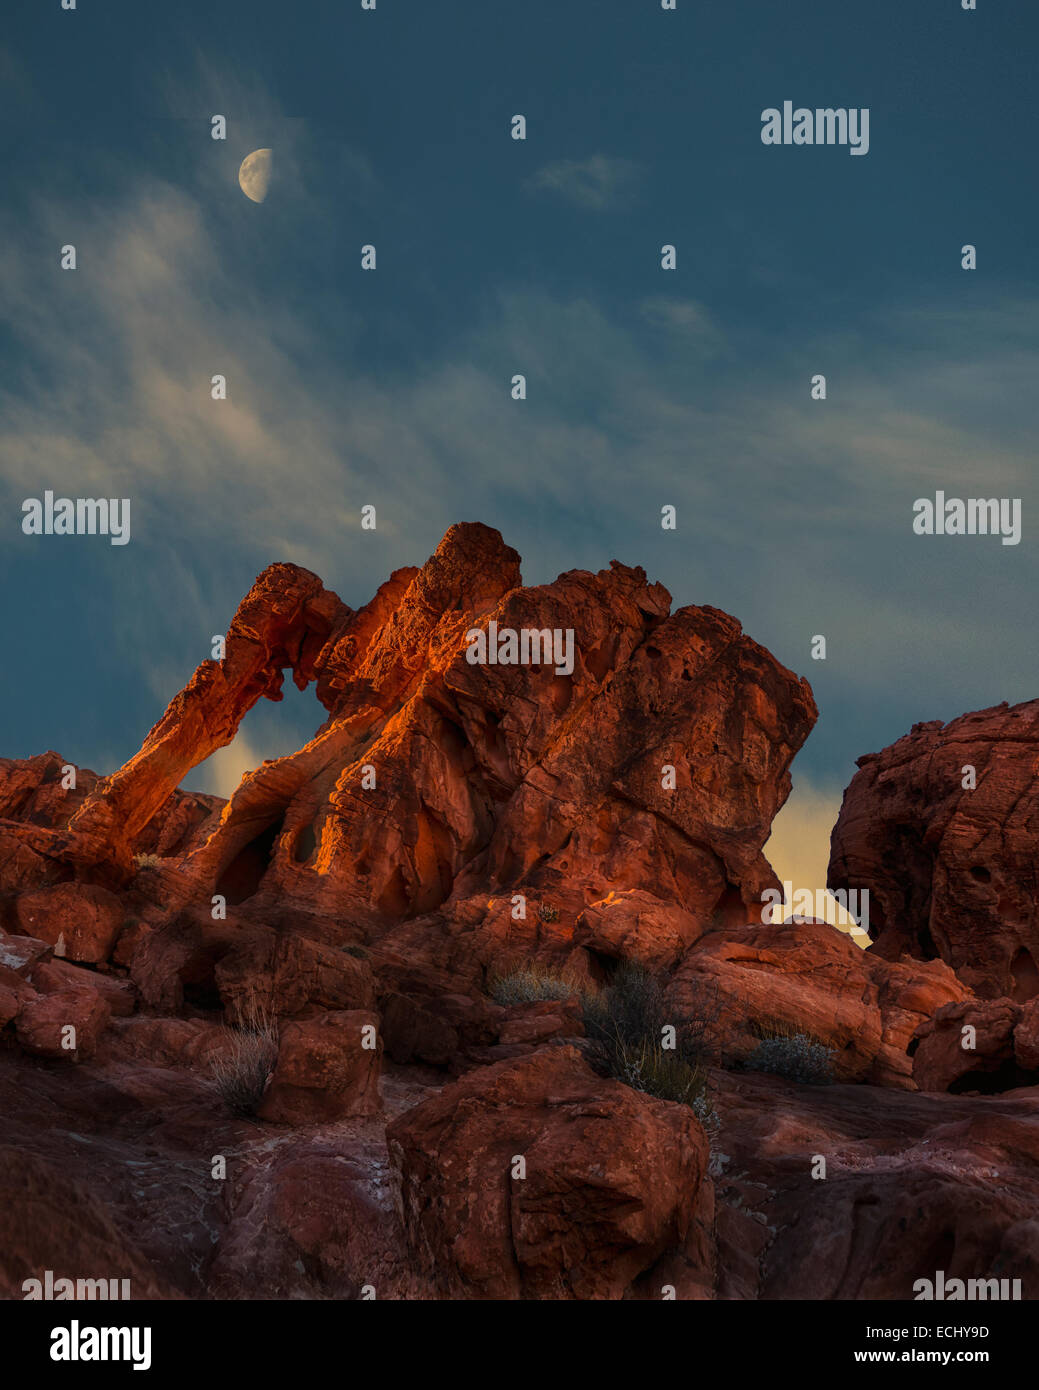 A vertical fine art style image of Elephant Rock at Valley of Fire State Park near Las Vegas Nevada. Stock Photo